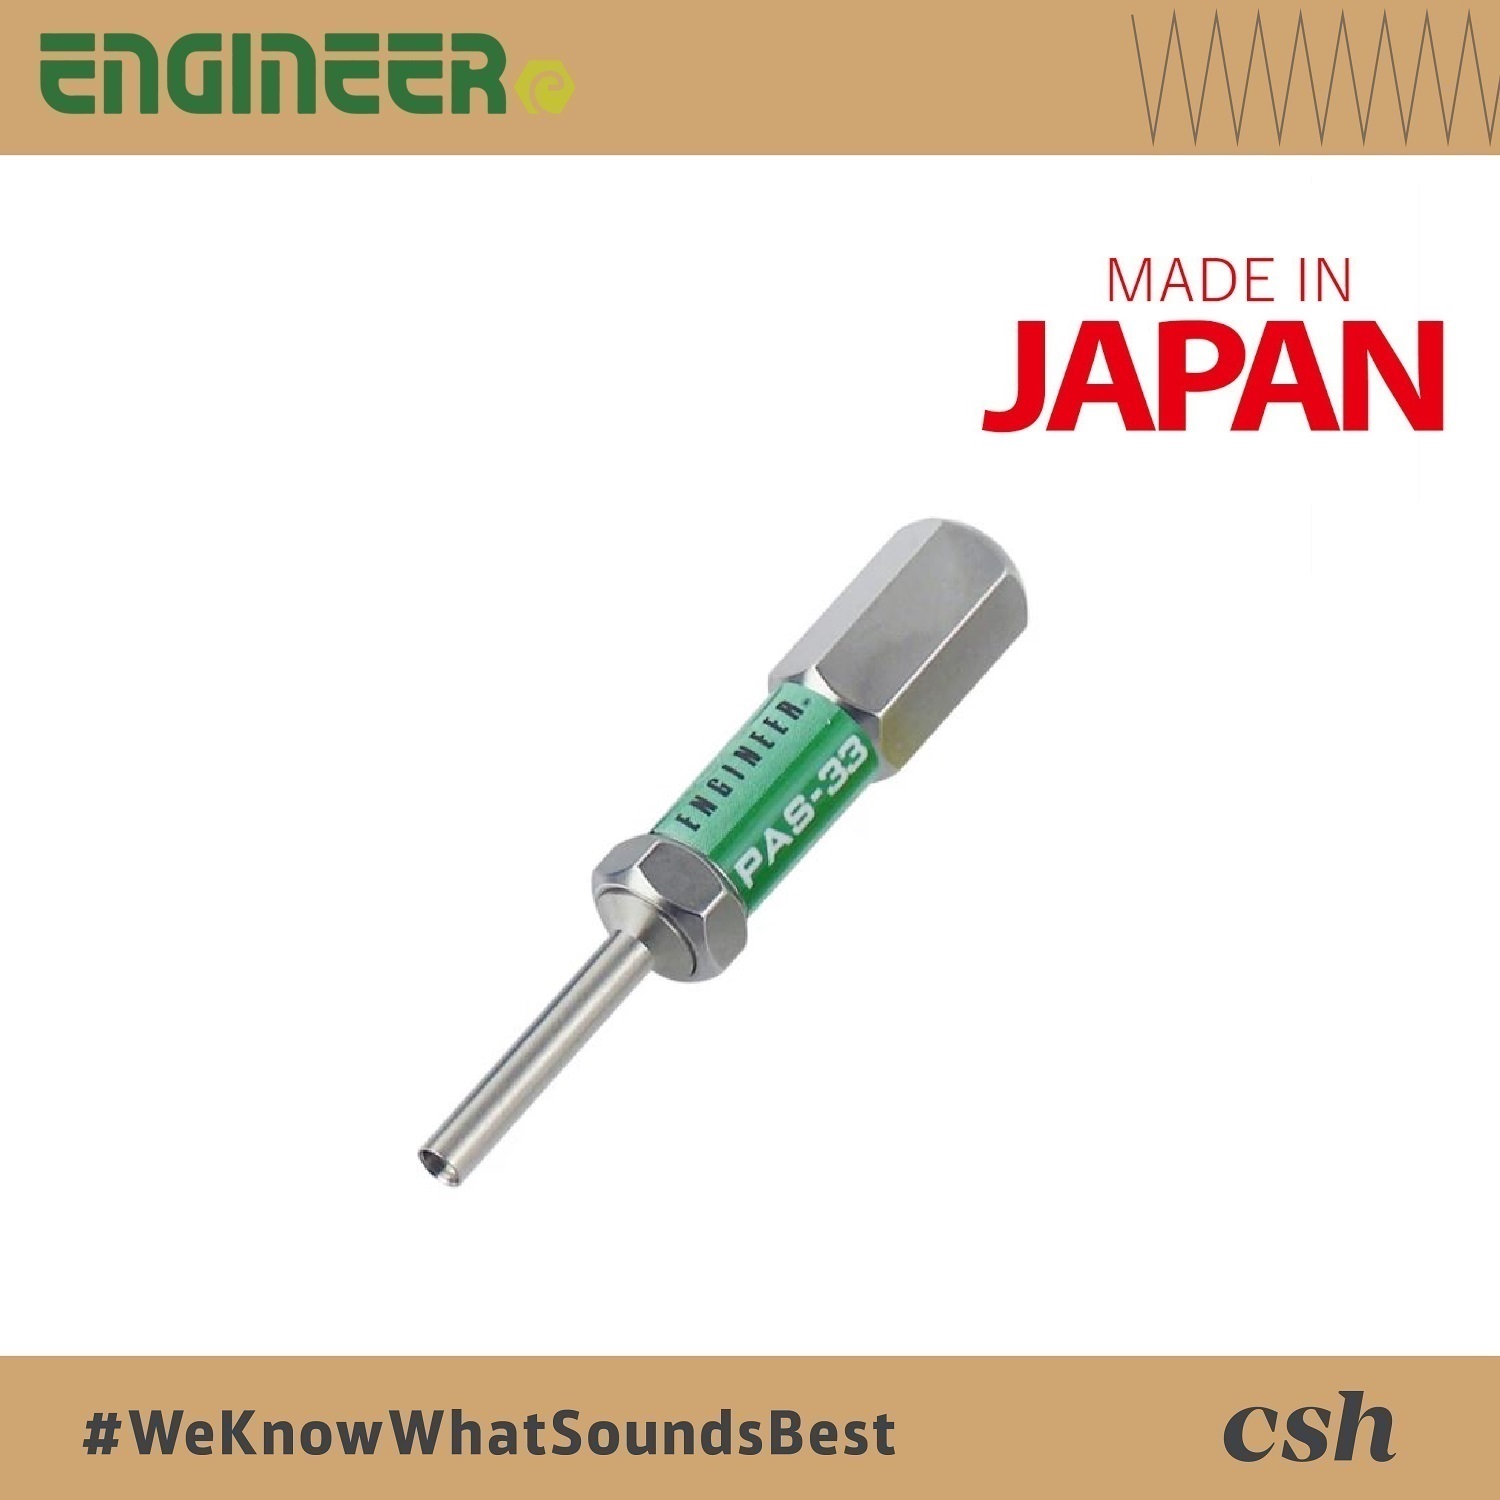 ENGINEER SS-30 Connector Pin Extractor Made in Japan